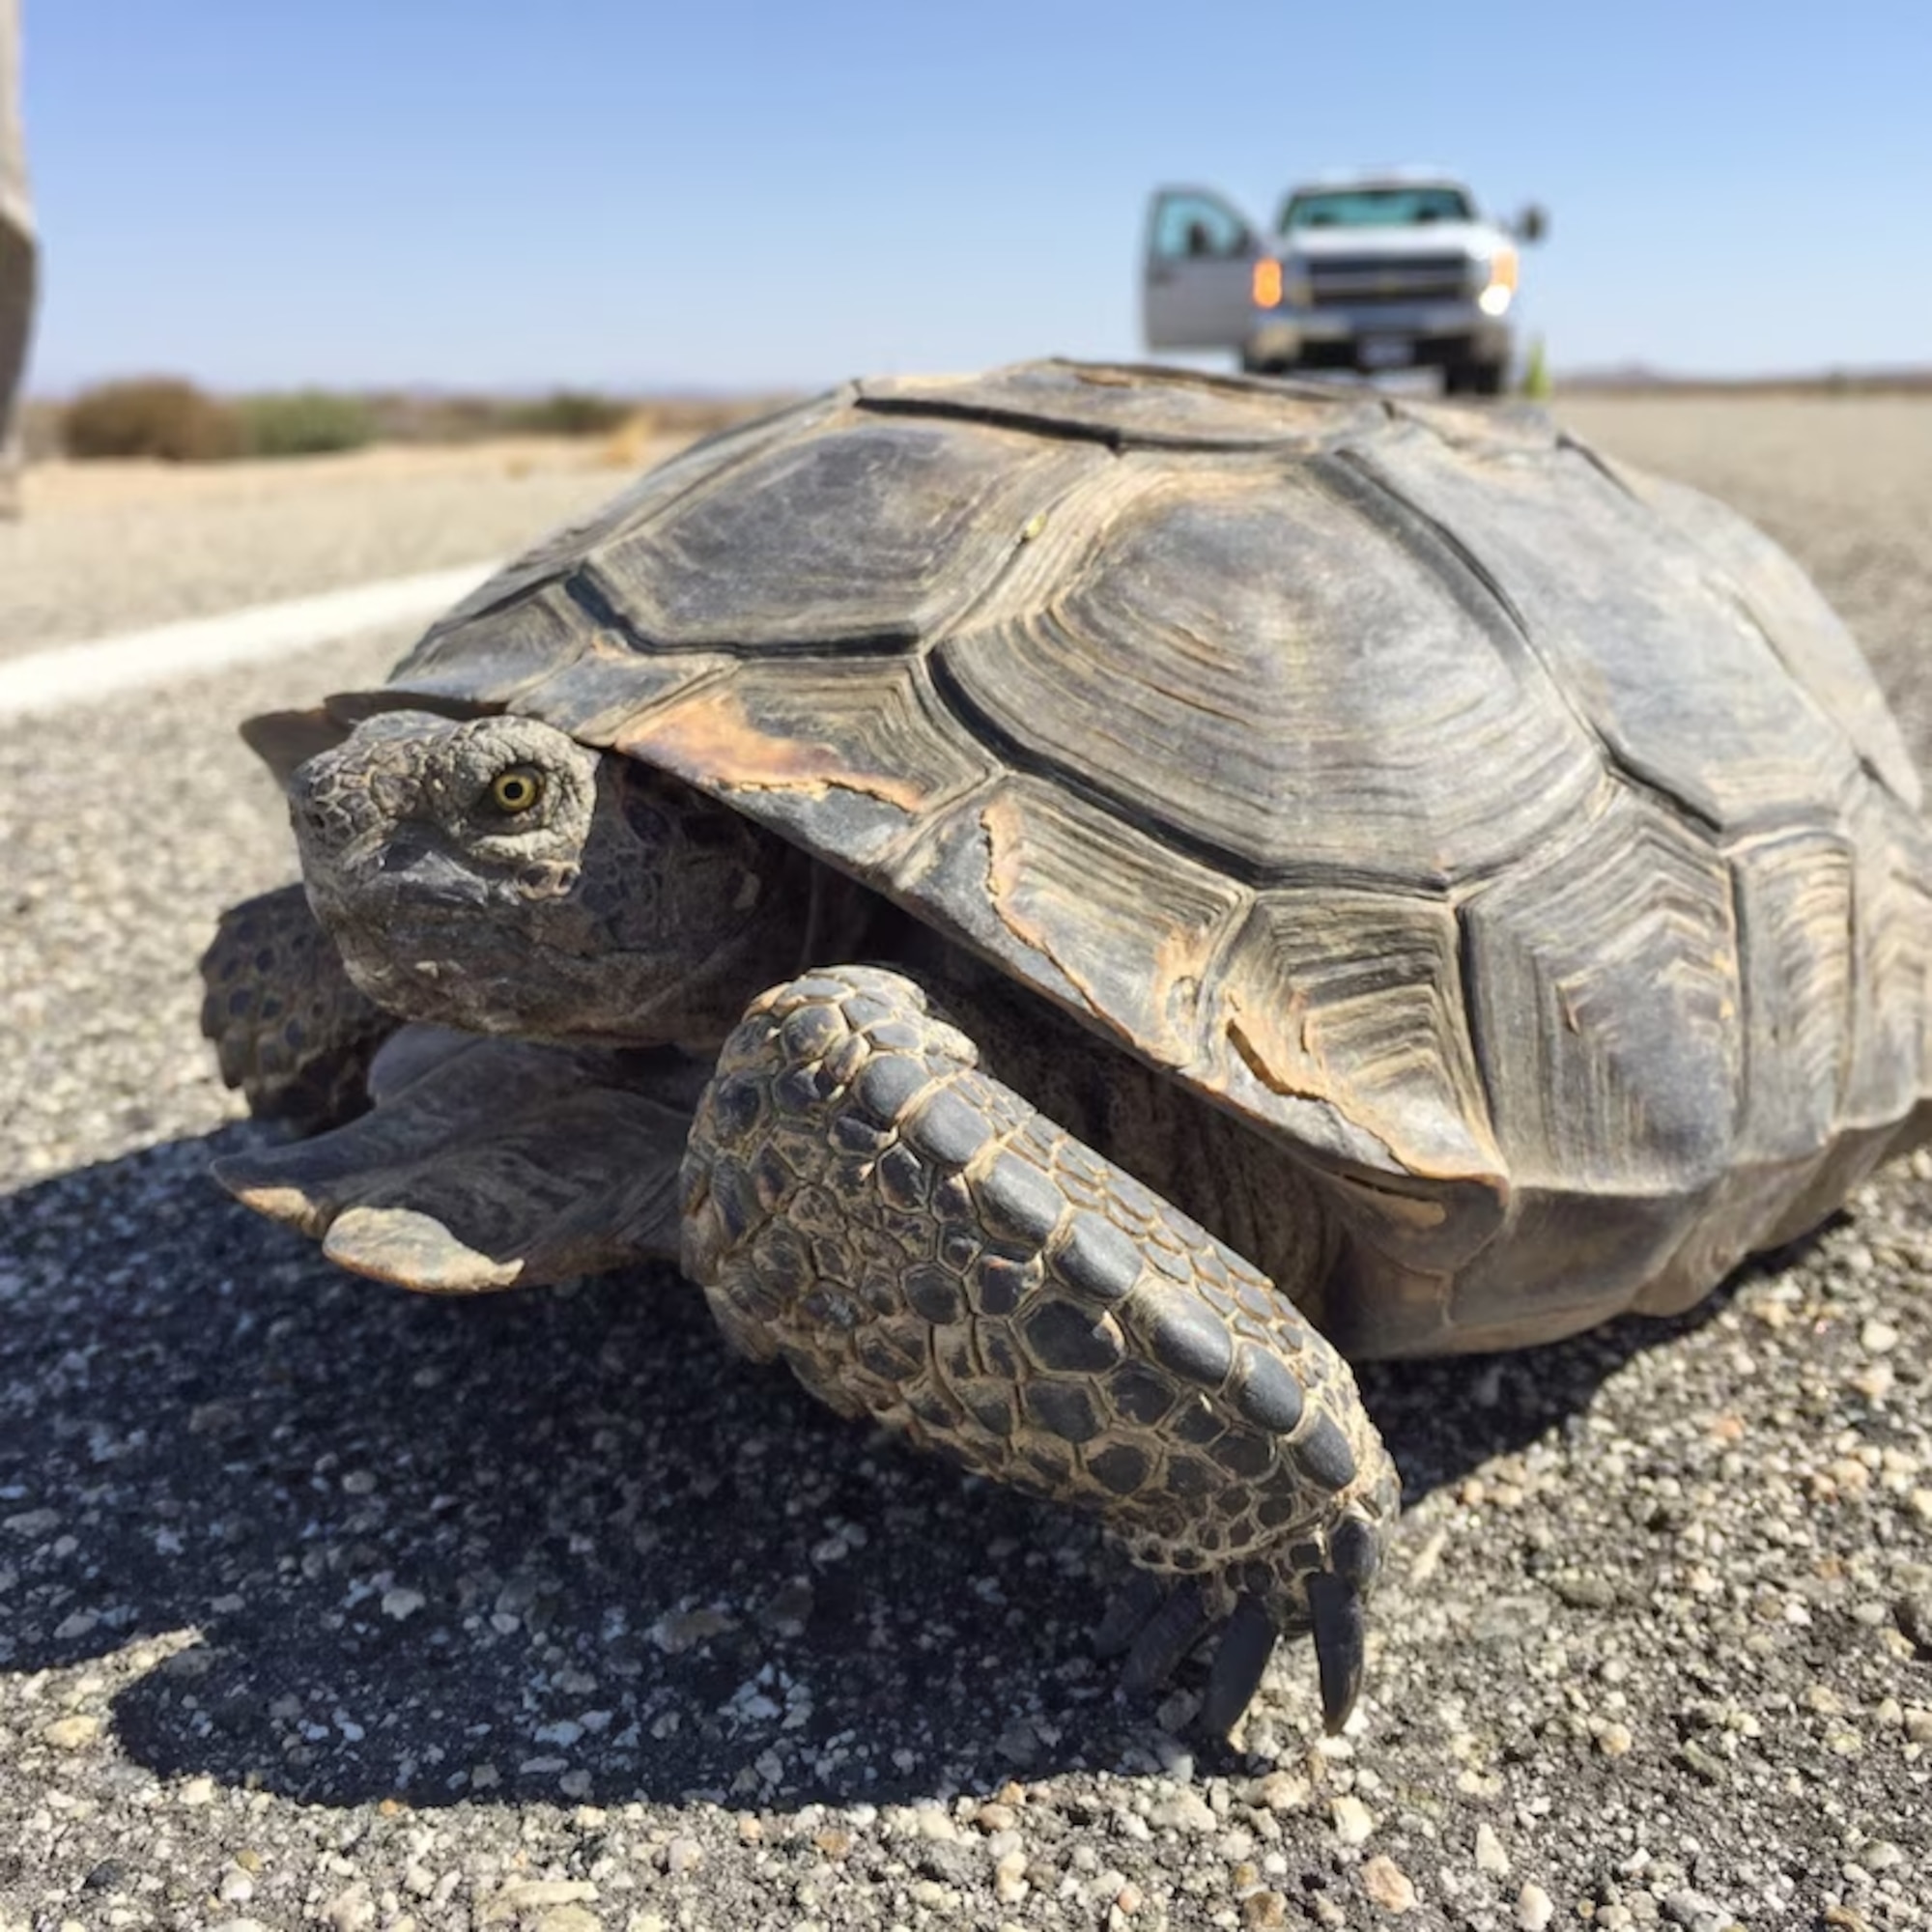 The Desert Tortoise is one of the many animals found on Edwards AFB.  Listed as threatened under the federal Endangered Species Act of 1973, Desert Tortoises are protected from unwarranted harassment or injury. The 412th Civil Engineer Group’s Environmental Management Division would like to remind base residents to be on the lookout for Desert Tortoises, especially near or crossing roadways.